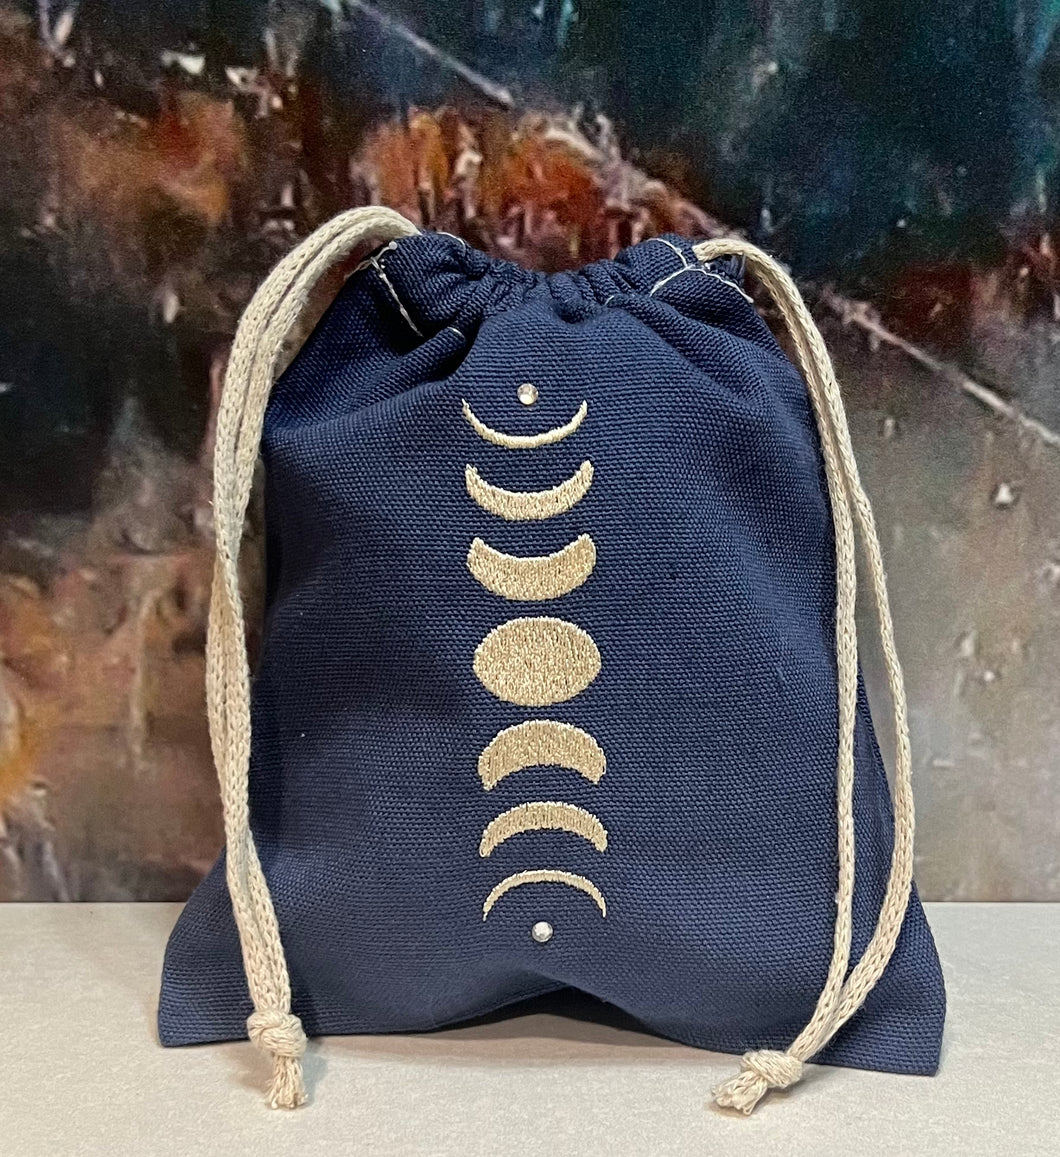 Phases of the Moon Embroidered Pouch